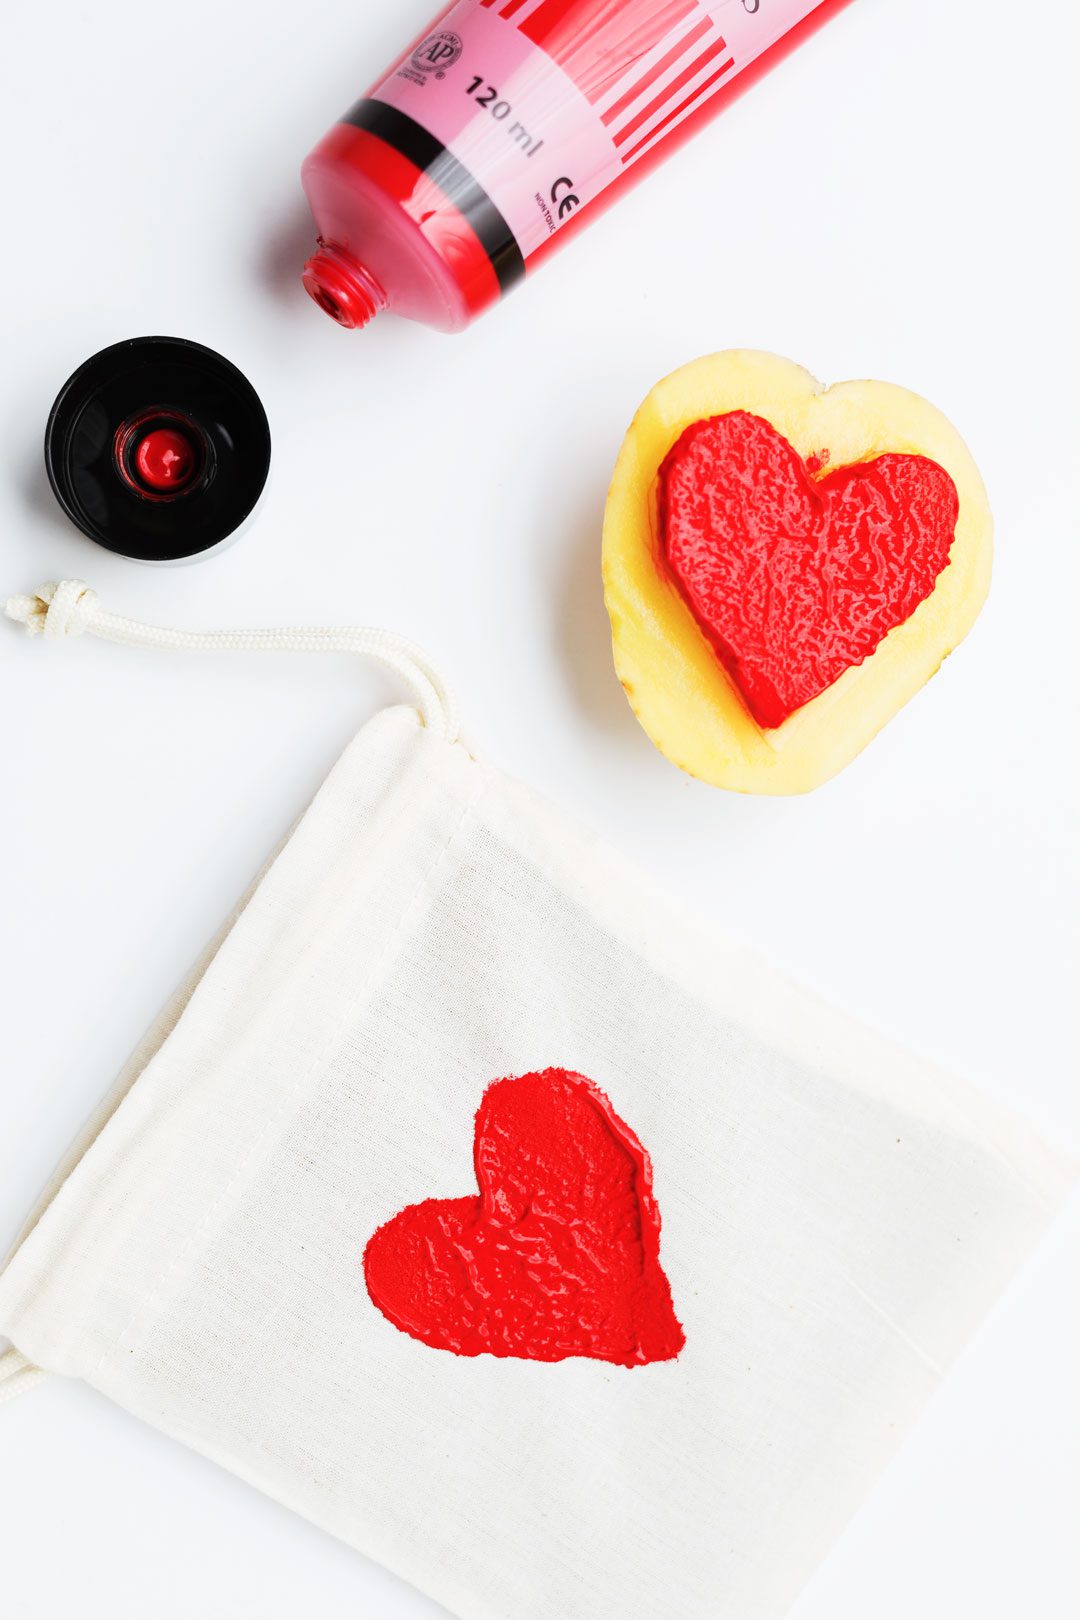 Red paint tube, a potato cut into a heart stamp, a drawstring bag with a red heart stamp.